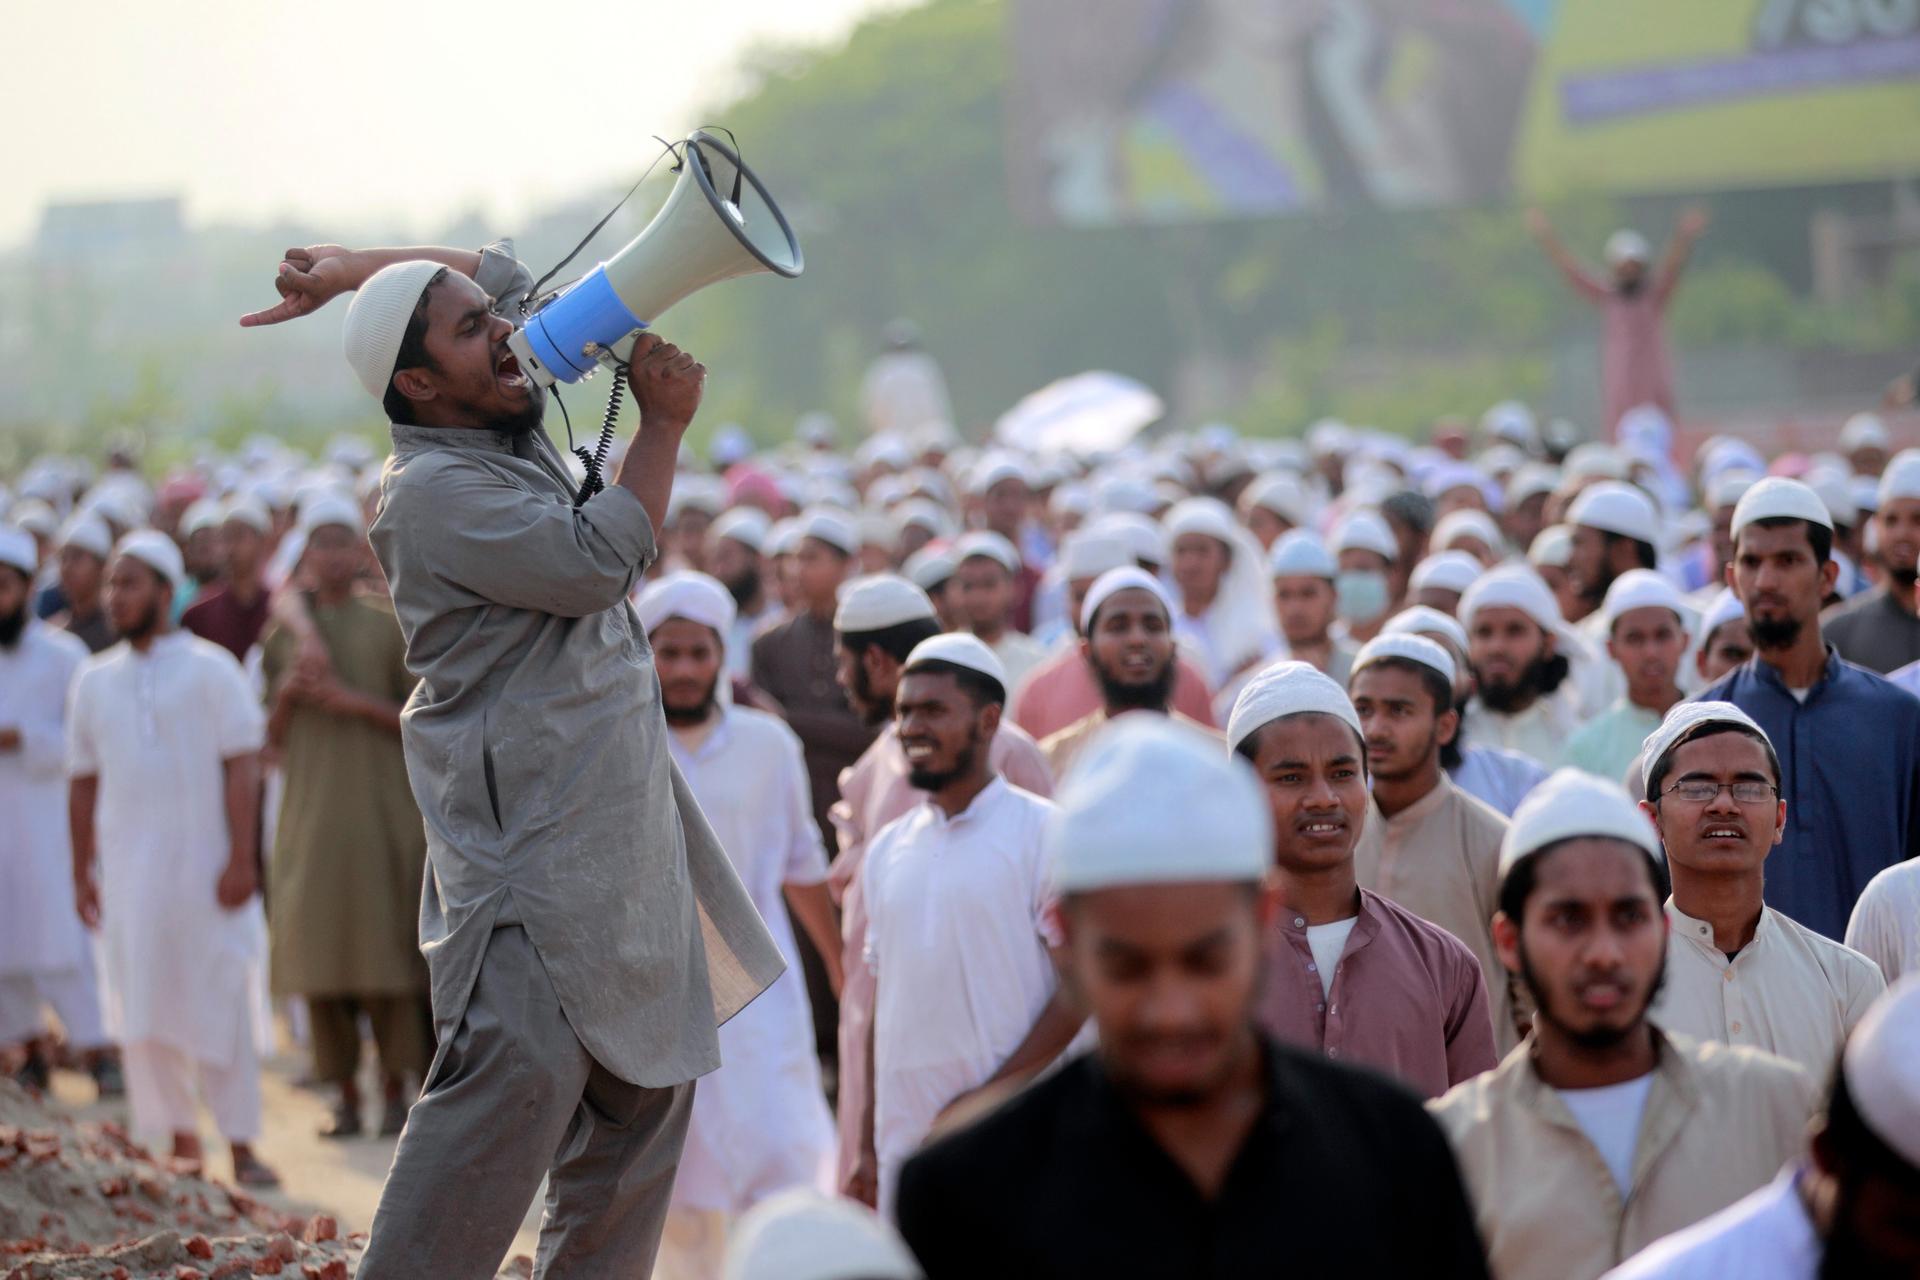 An activist shouts slogans during a rally in Dhaka April 4, 2013. He is a member of the Hefajat-e-Islam, a radical Islamist party that has demanded capital punishment for secular Bangladeshi bloggers.